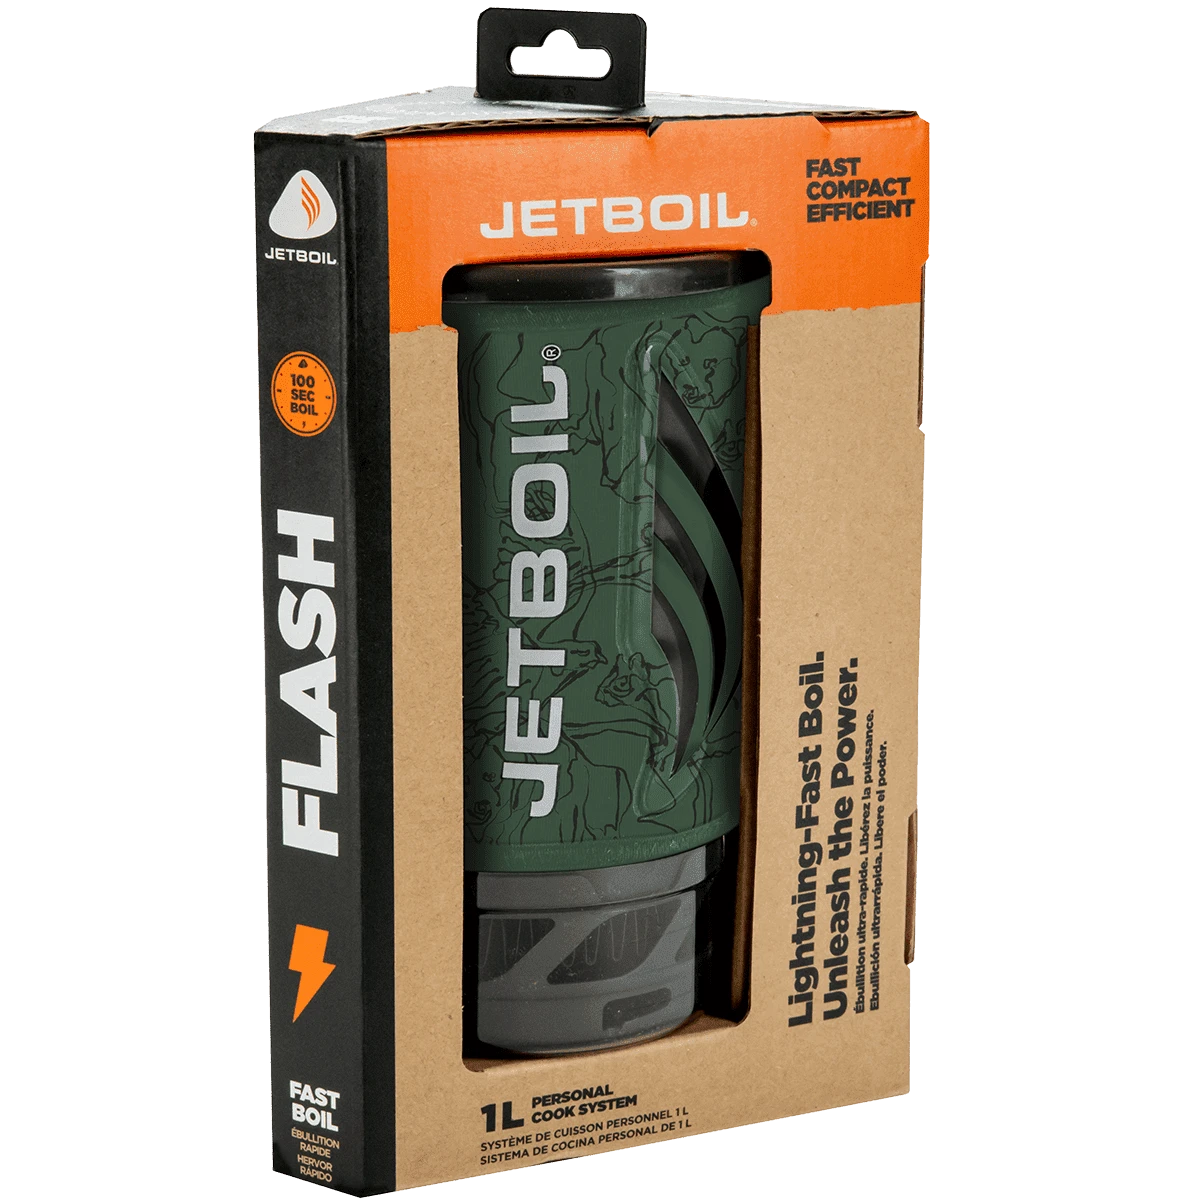 Jetboil Wild Flash Cooking System in packaging